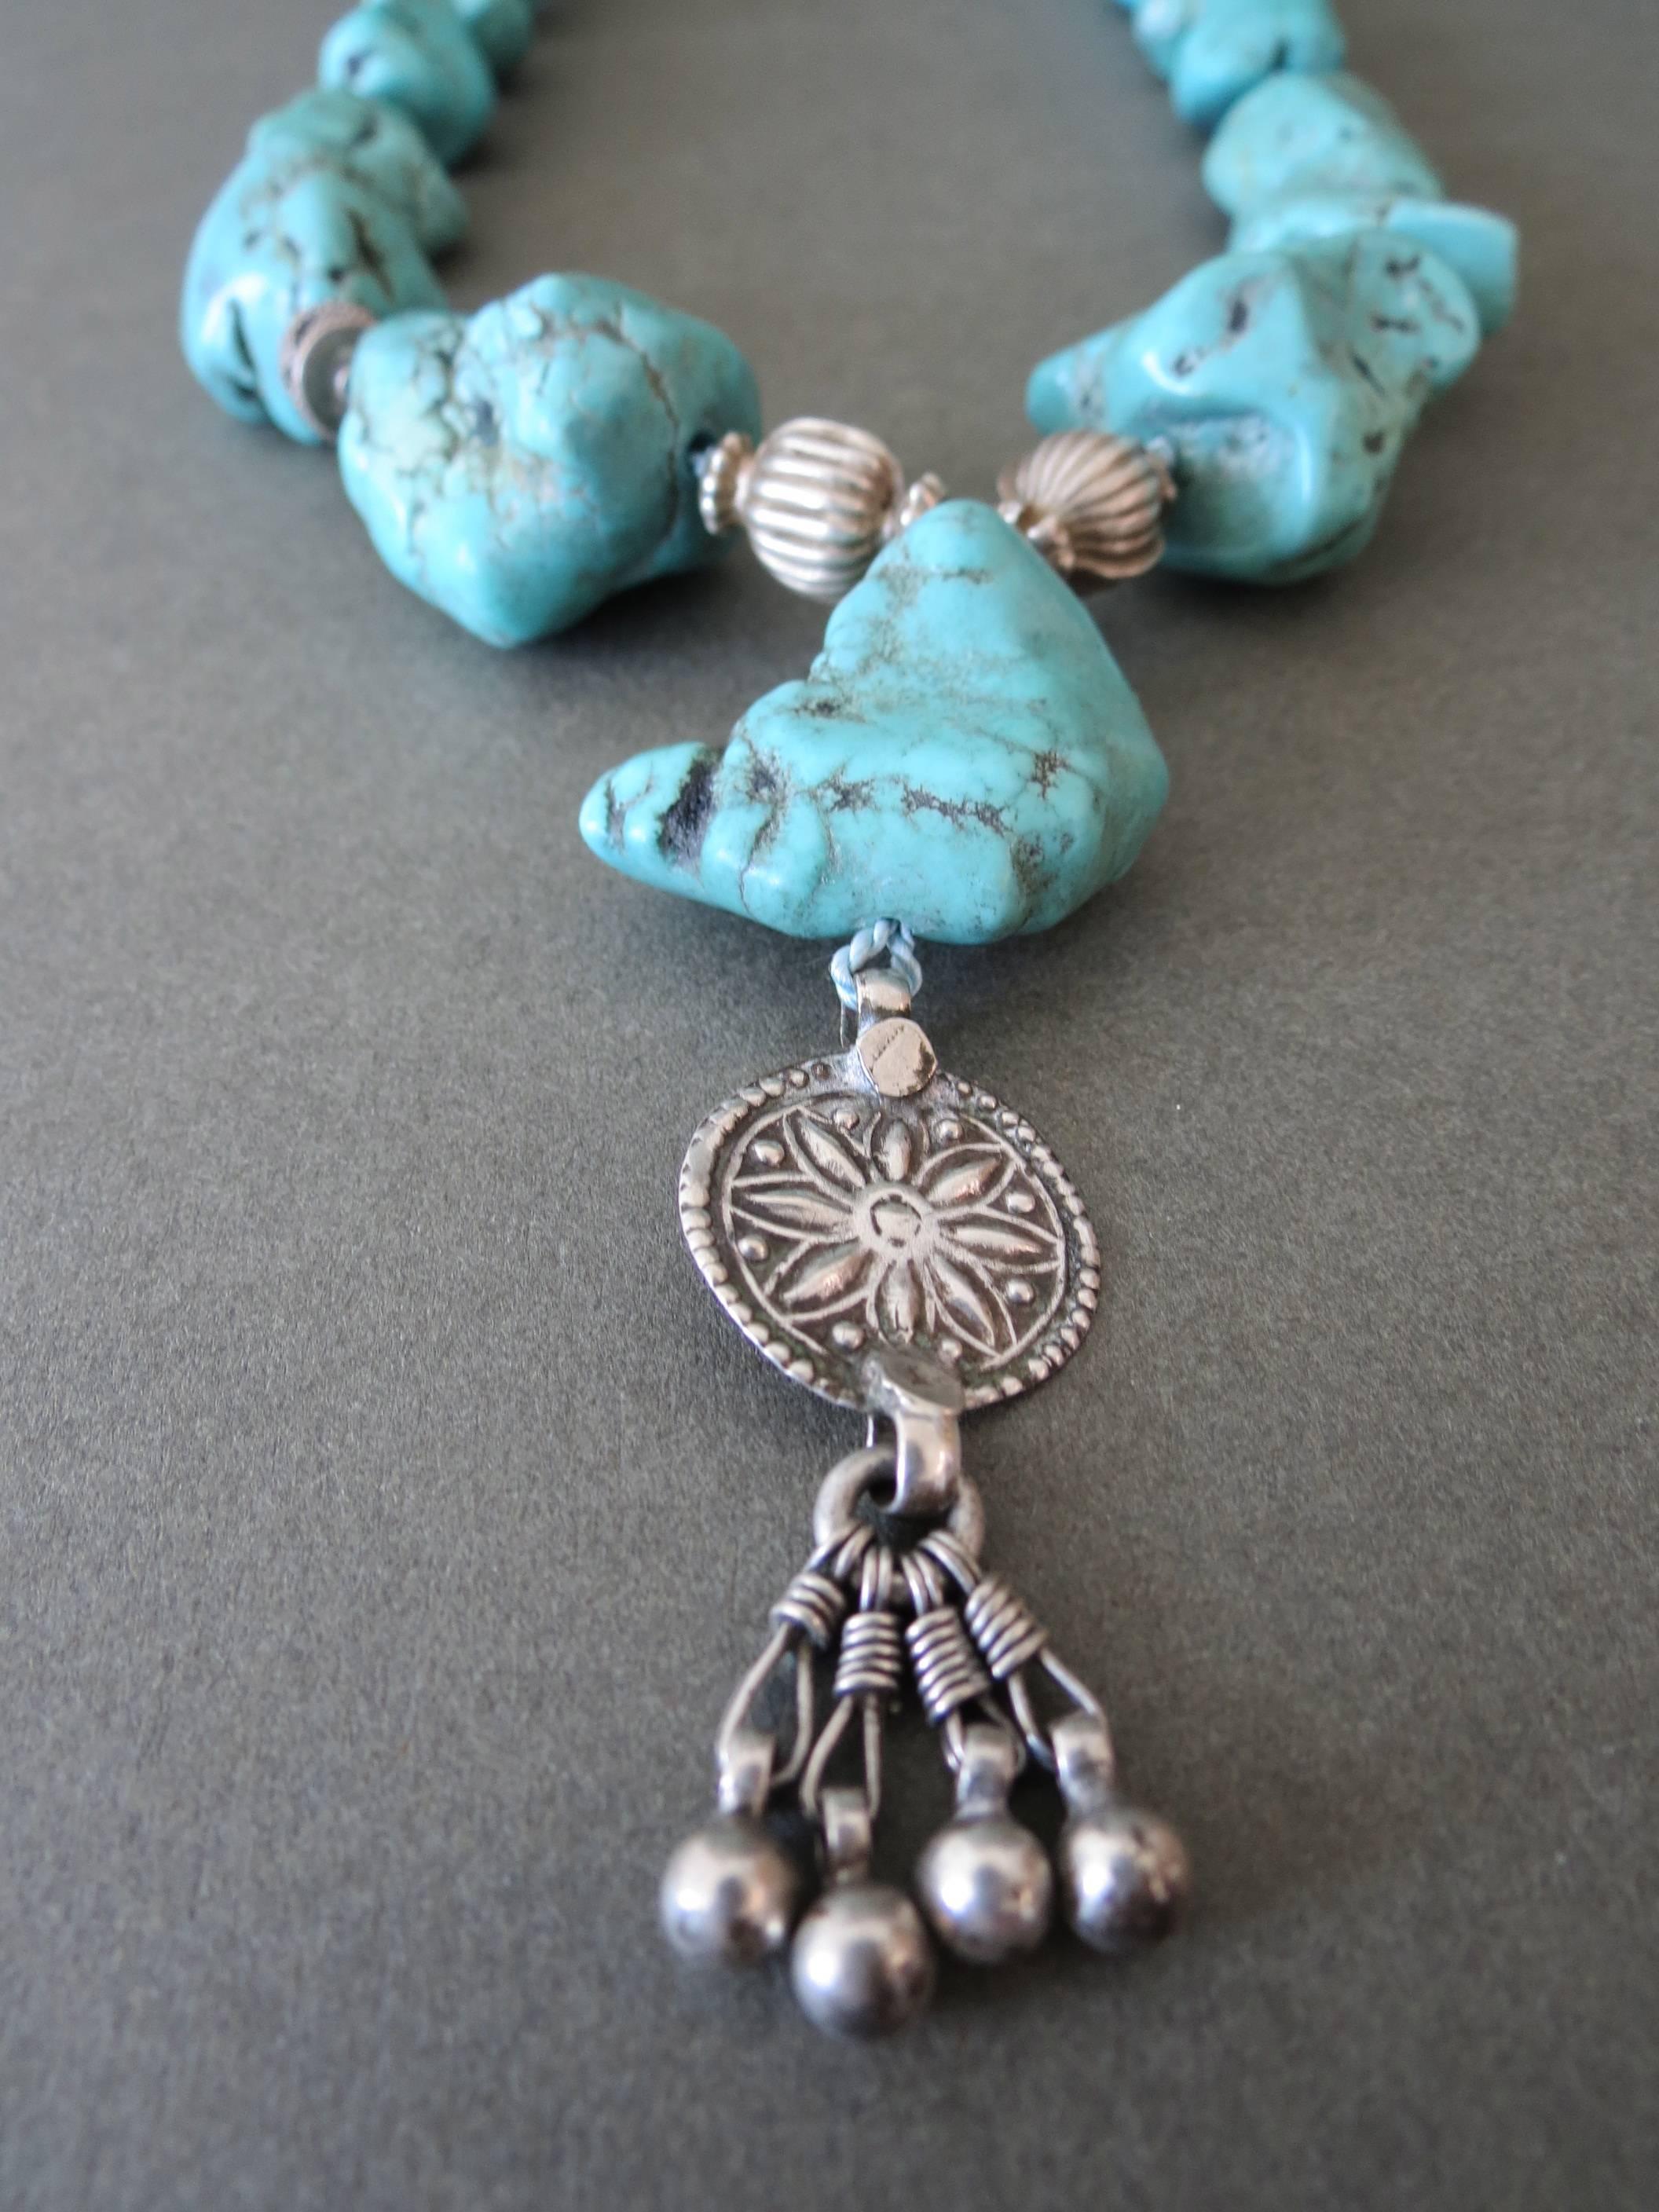 Vintage Turquoise Nugget Bead Necklace with Sterling Silver Details For Sale 1